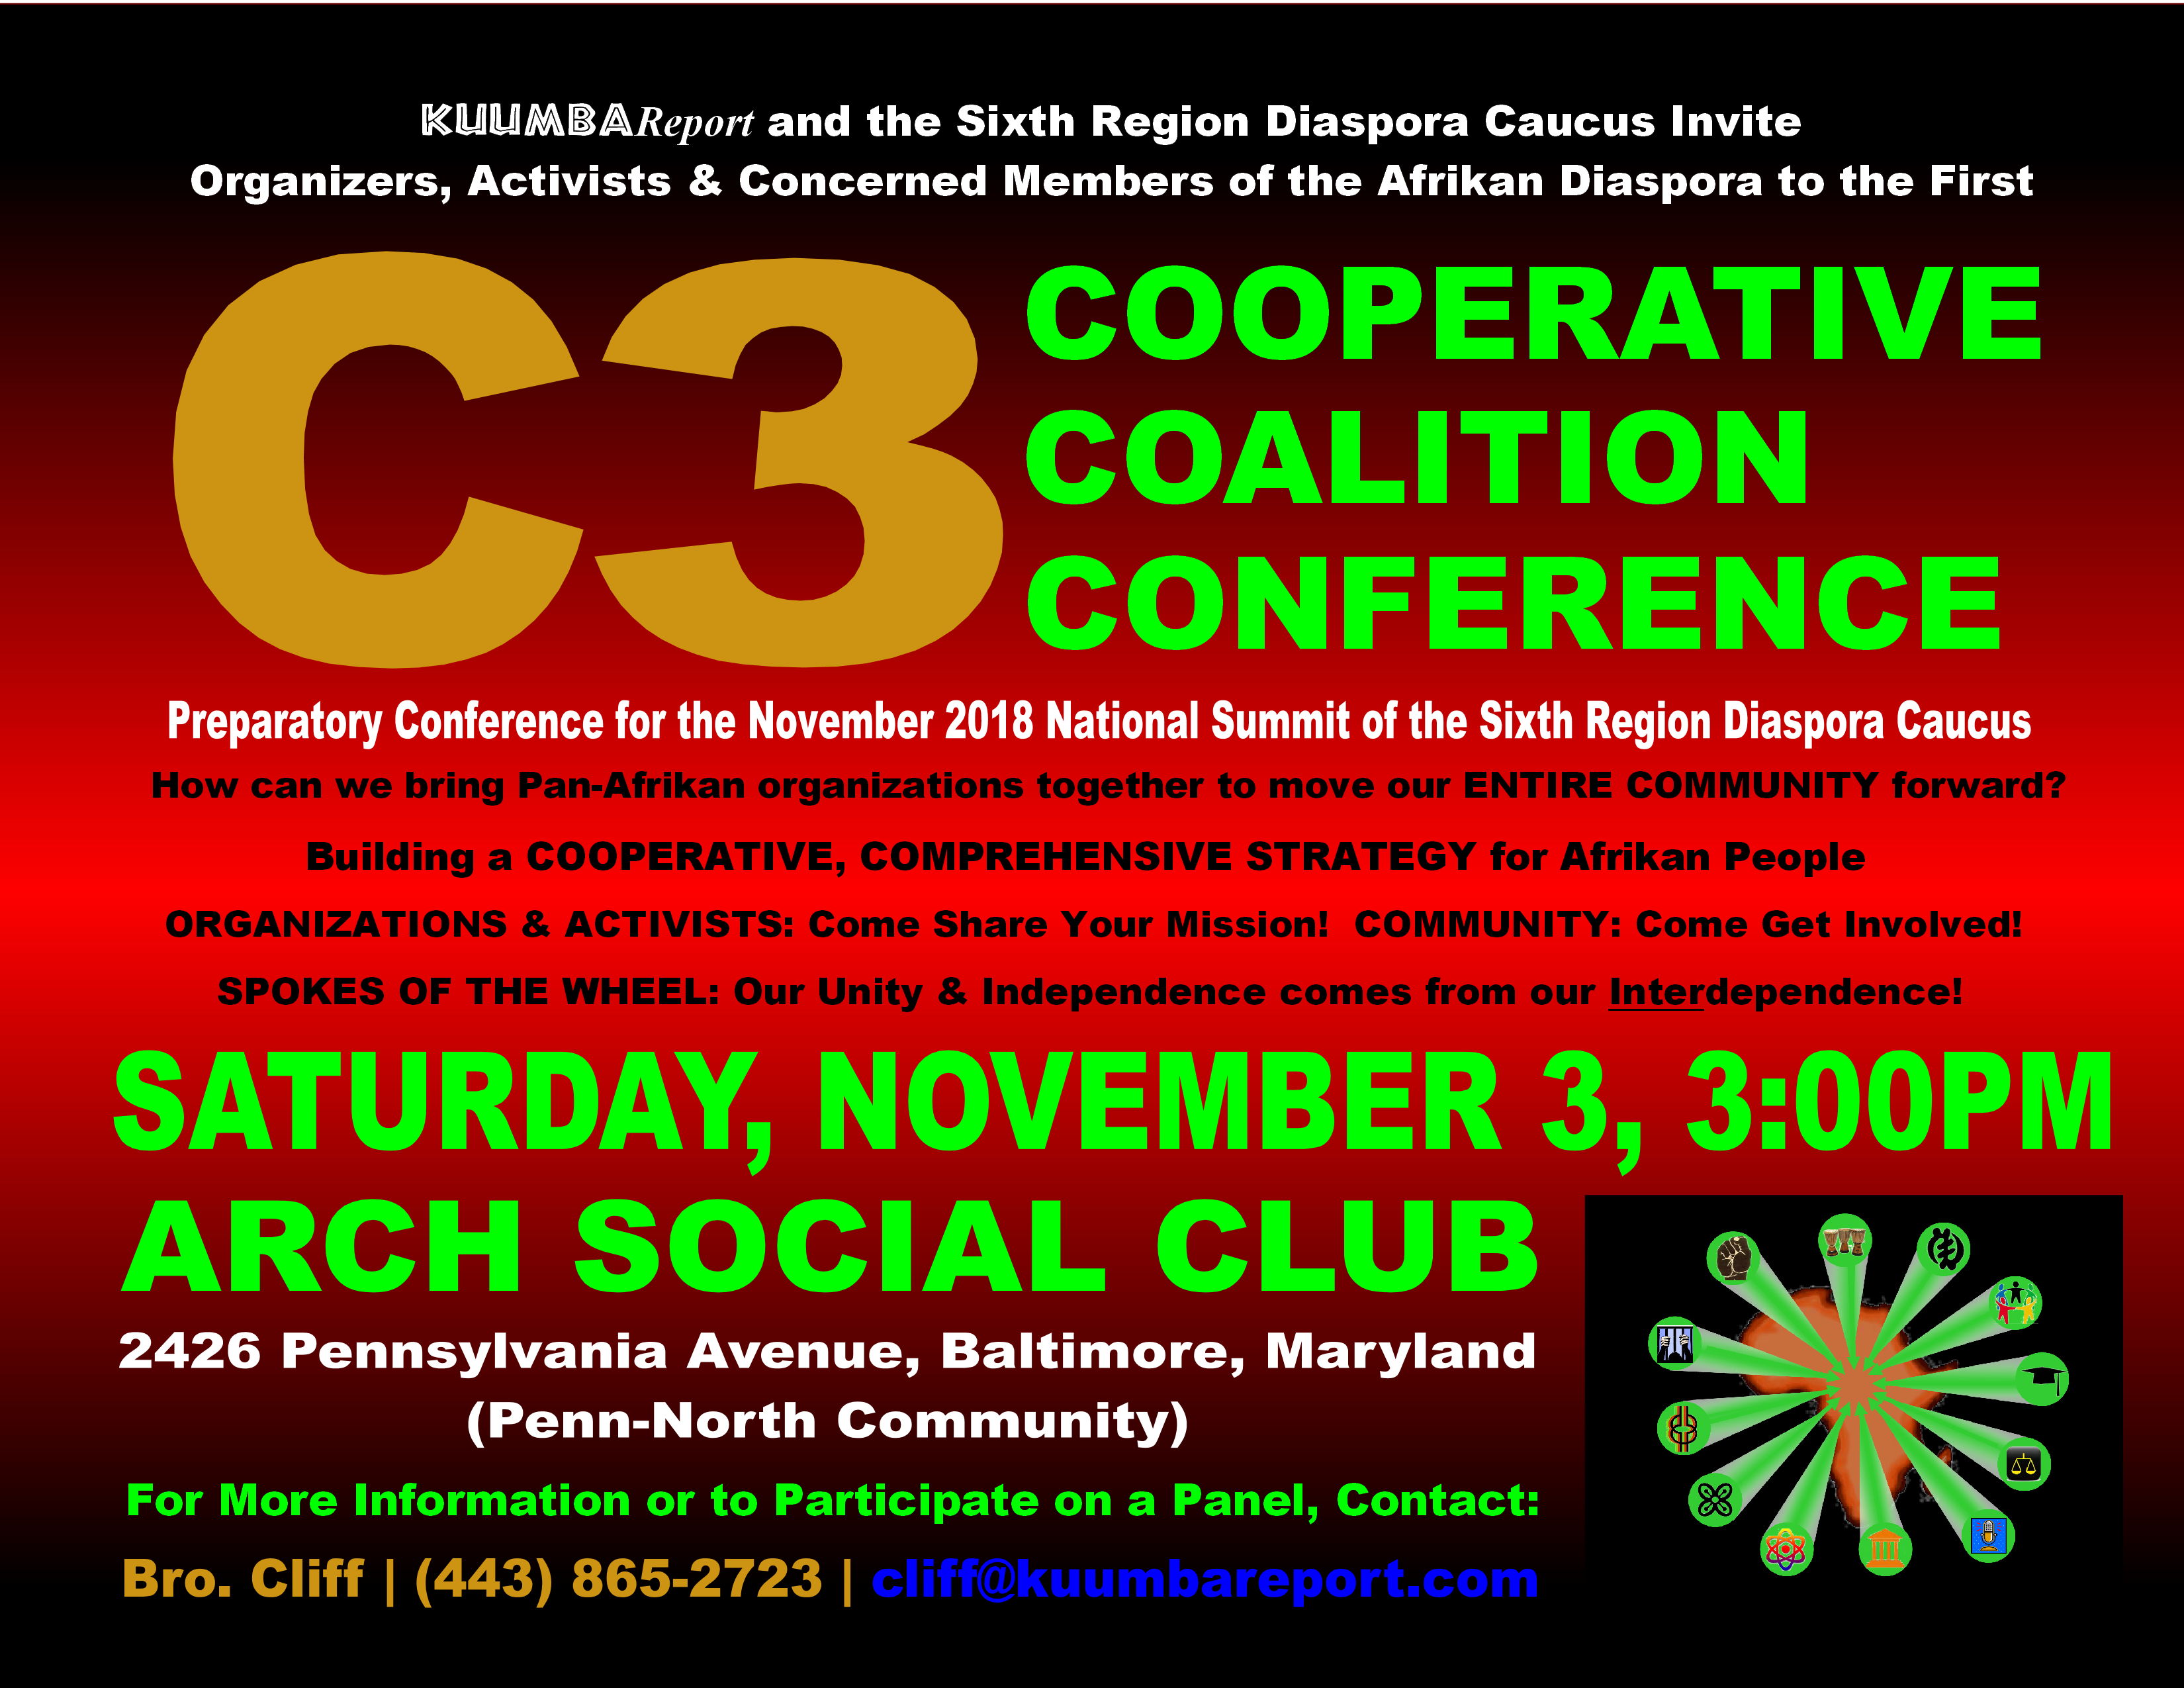 Cooperative Coalition Conference November 3, 2018 in Baltimore